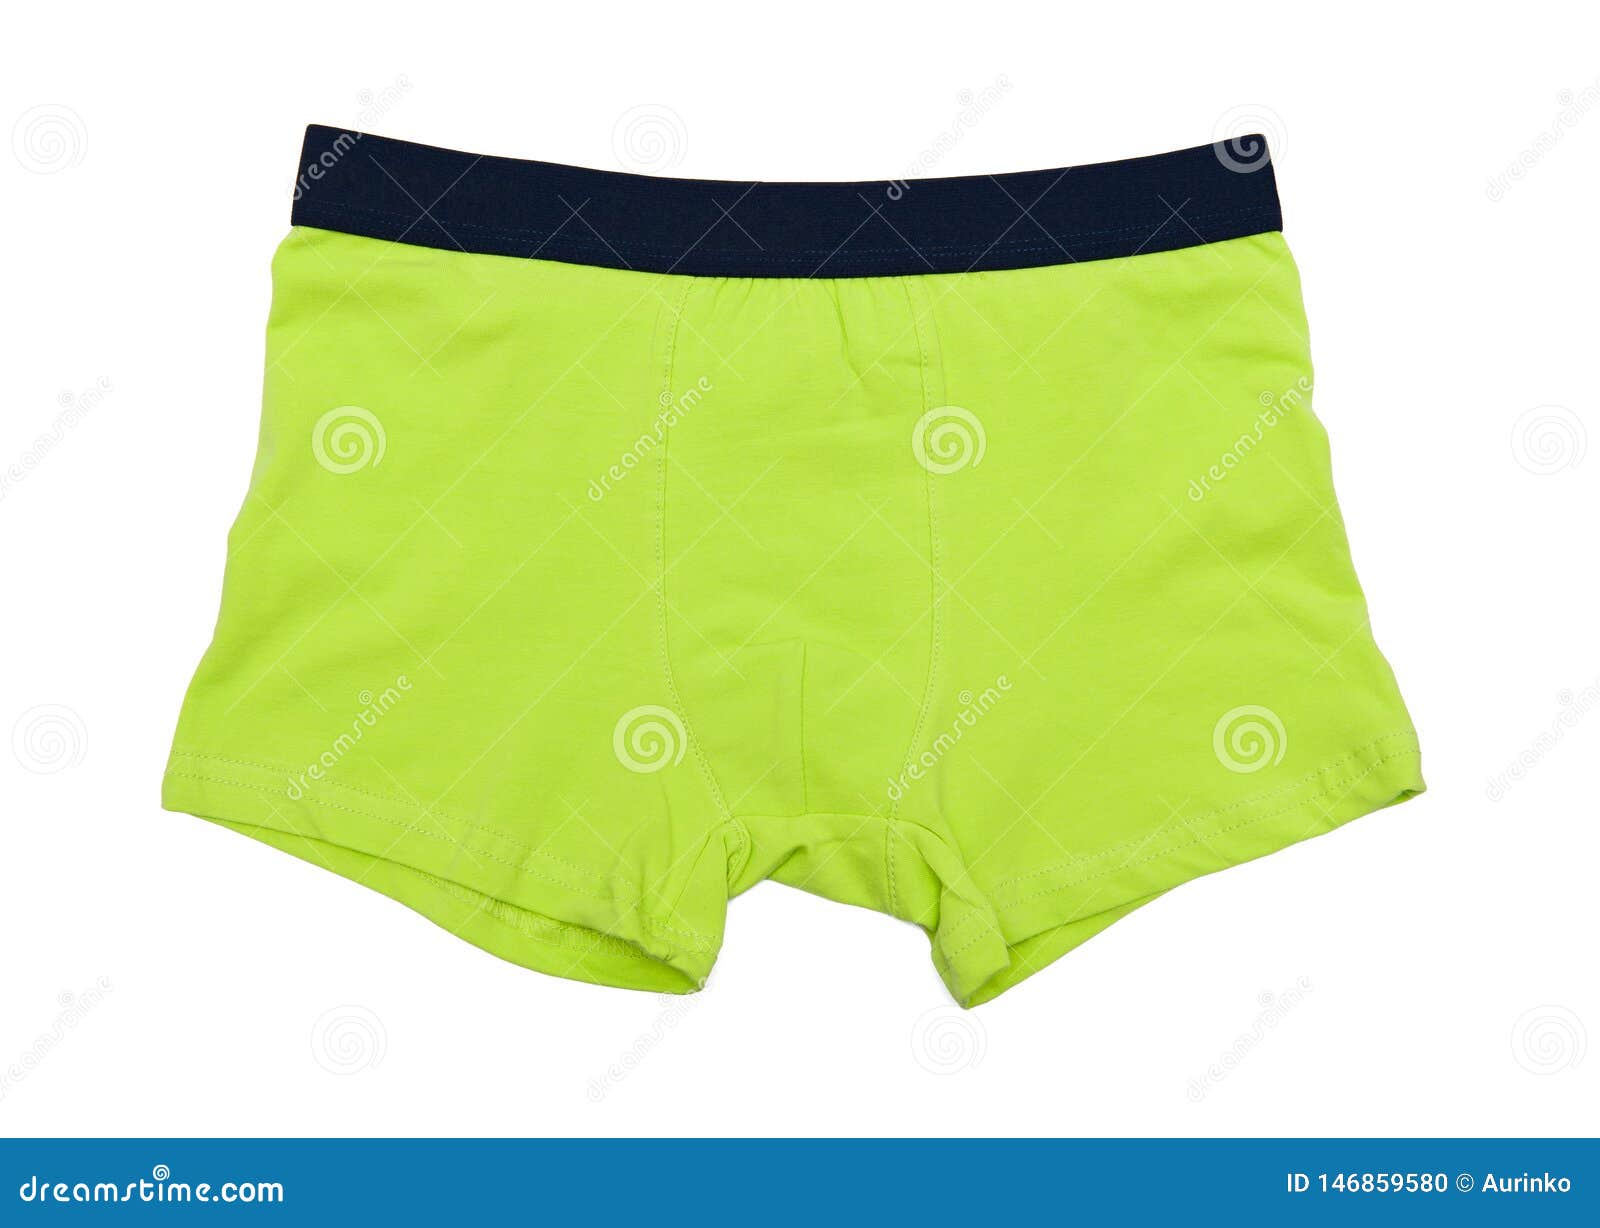 Boxer shorts stock photo. Image of style, rubber, sport - 146859580